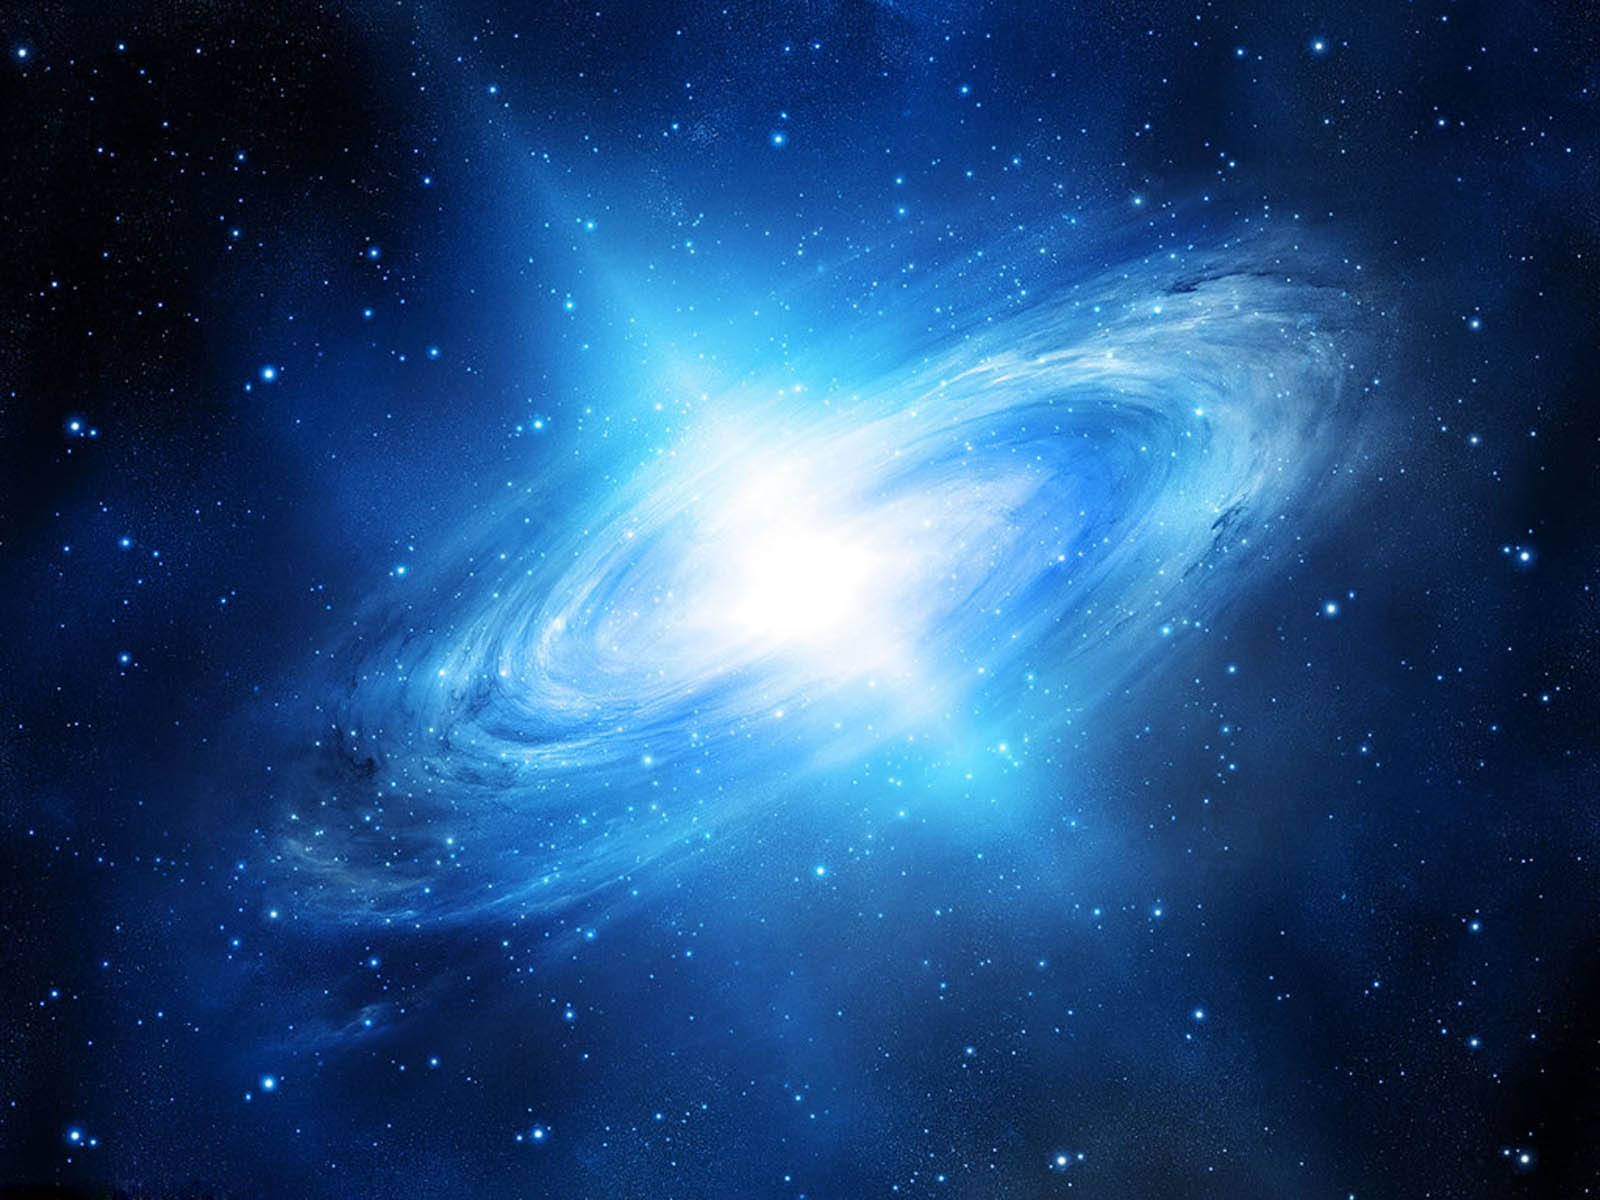 Great Blue light and space background #4009